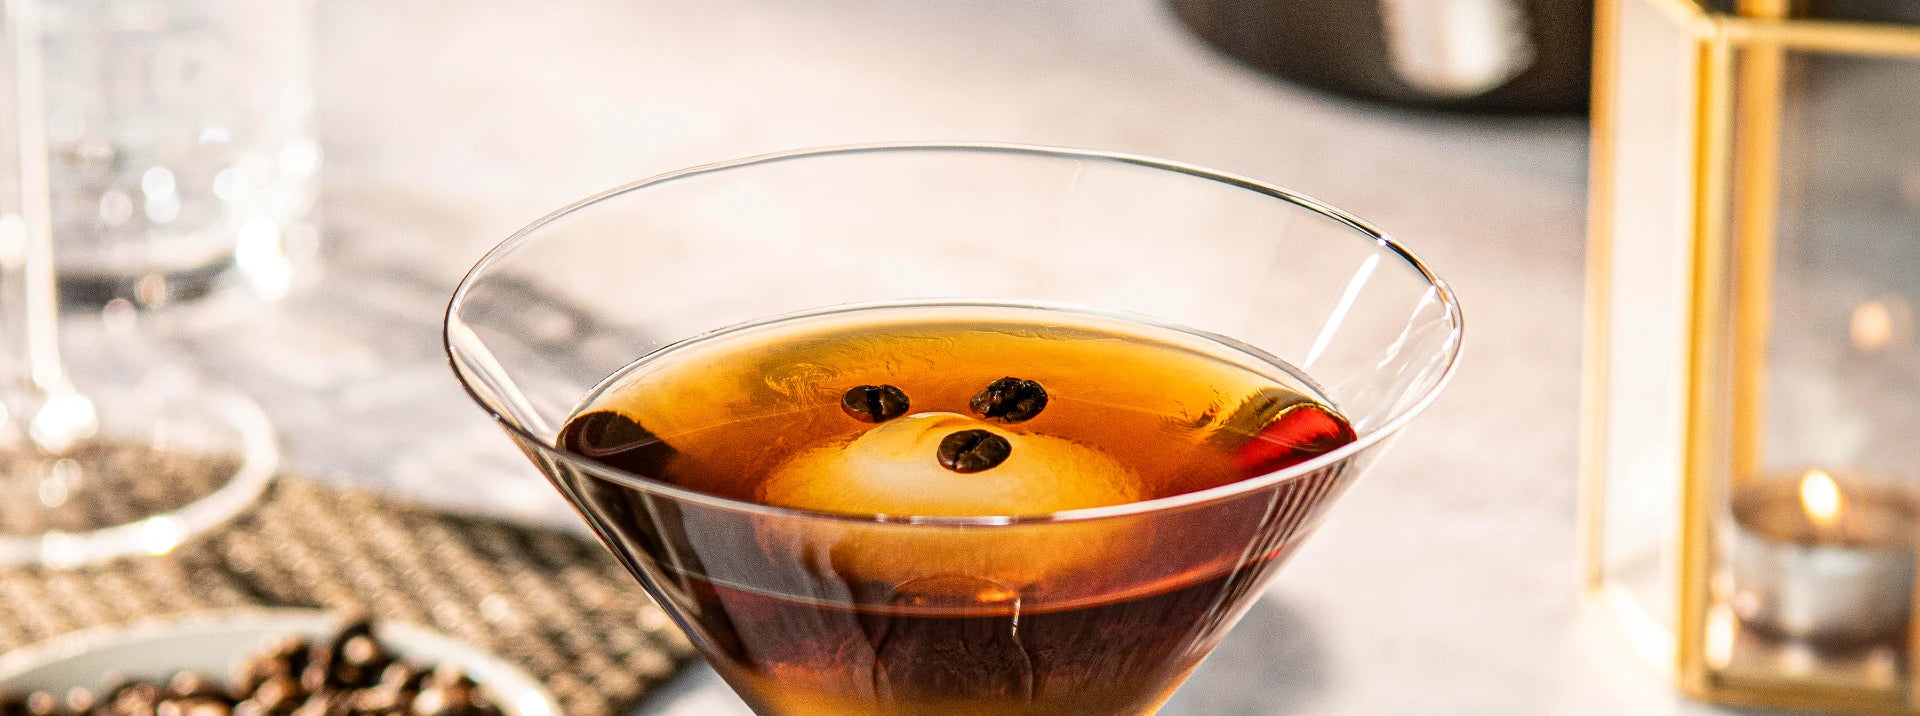 detail of martini glass with coffee cocktail in it and coffee beans